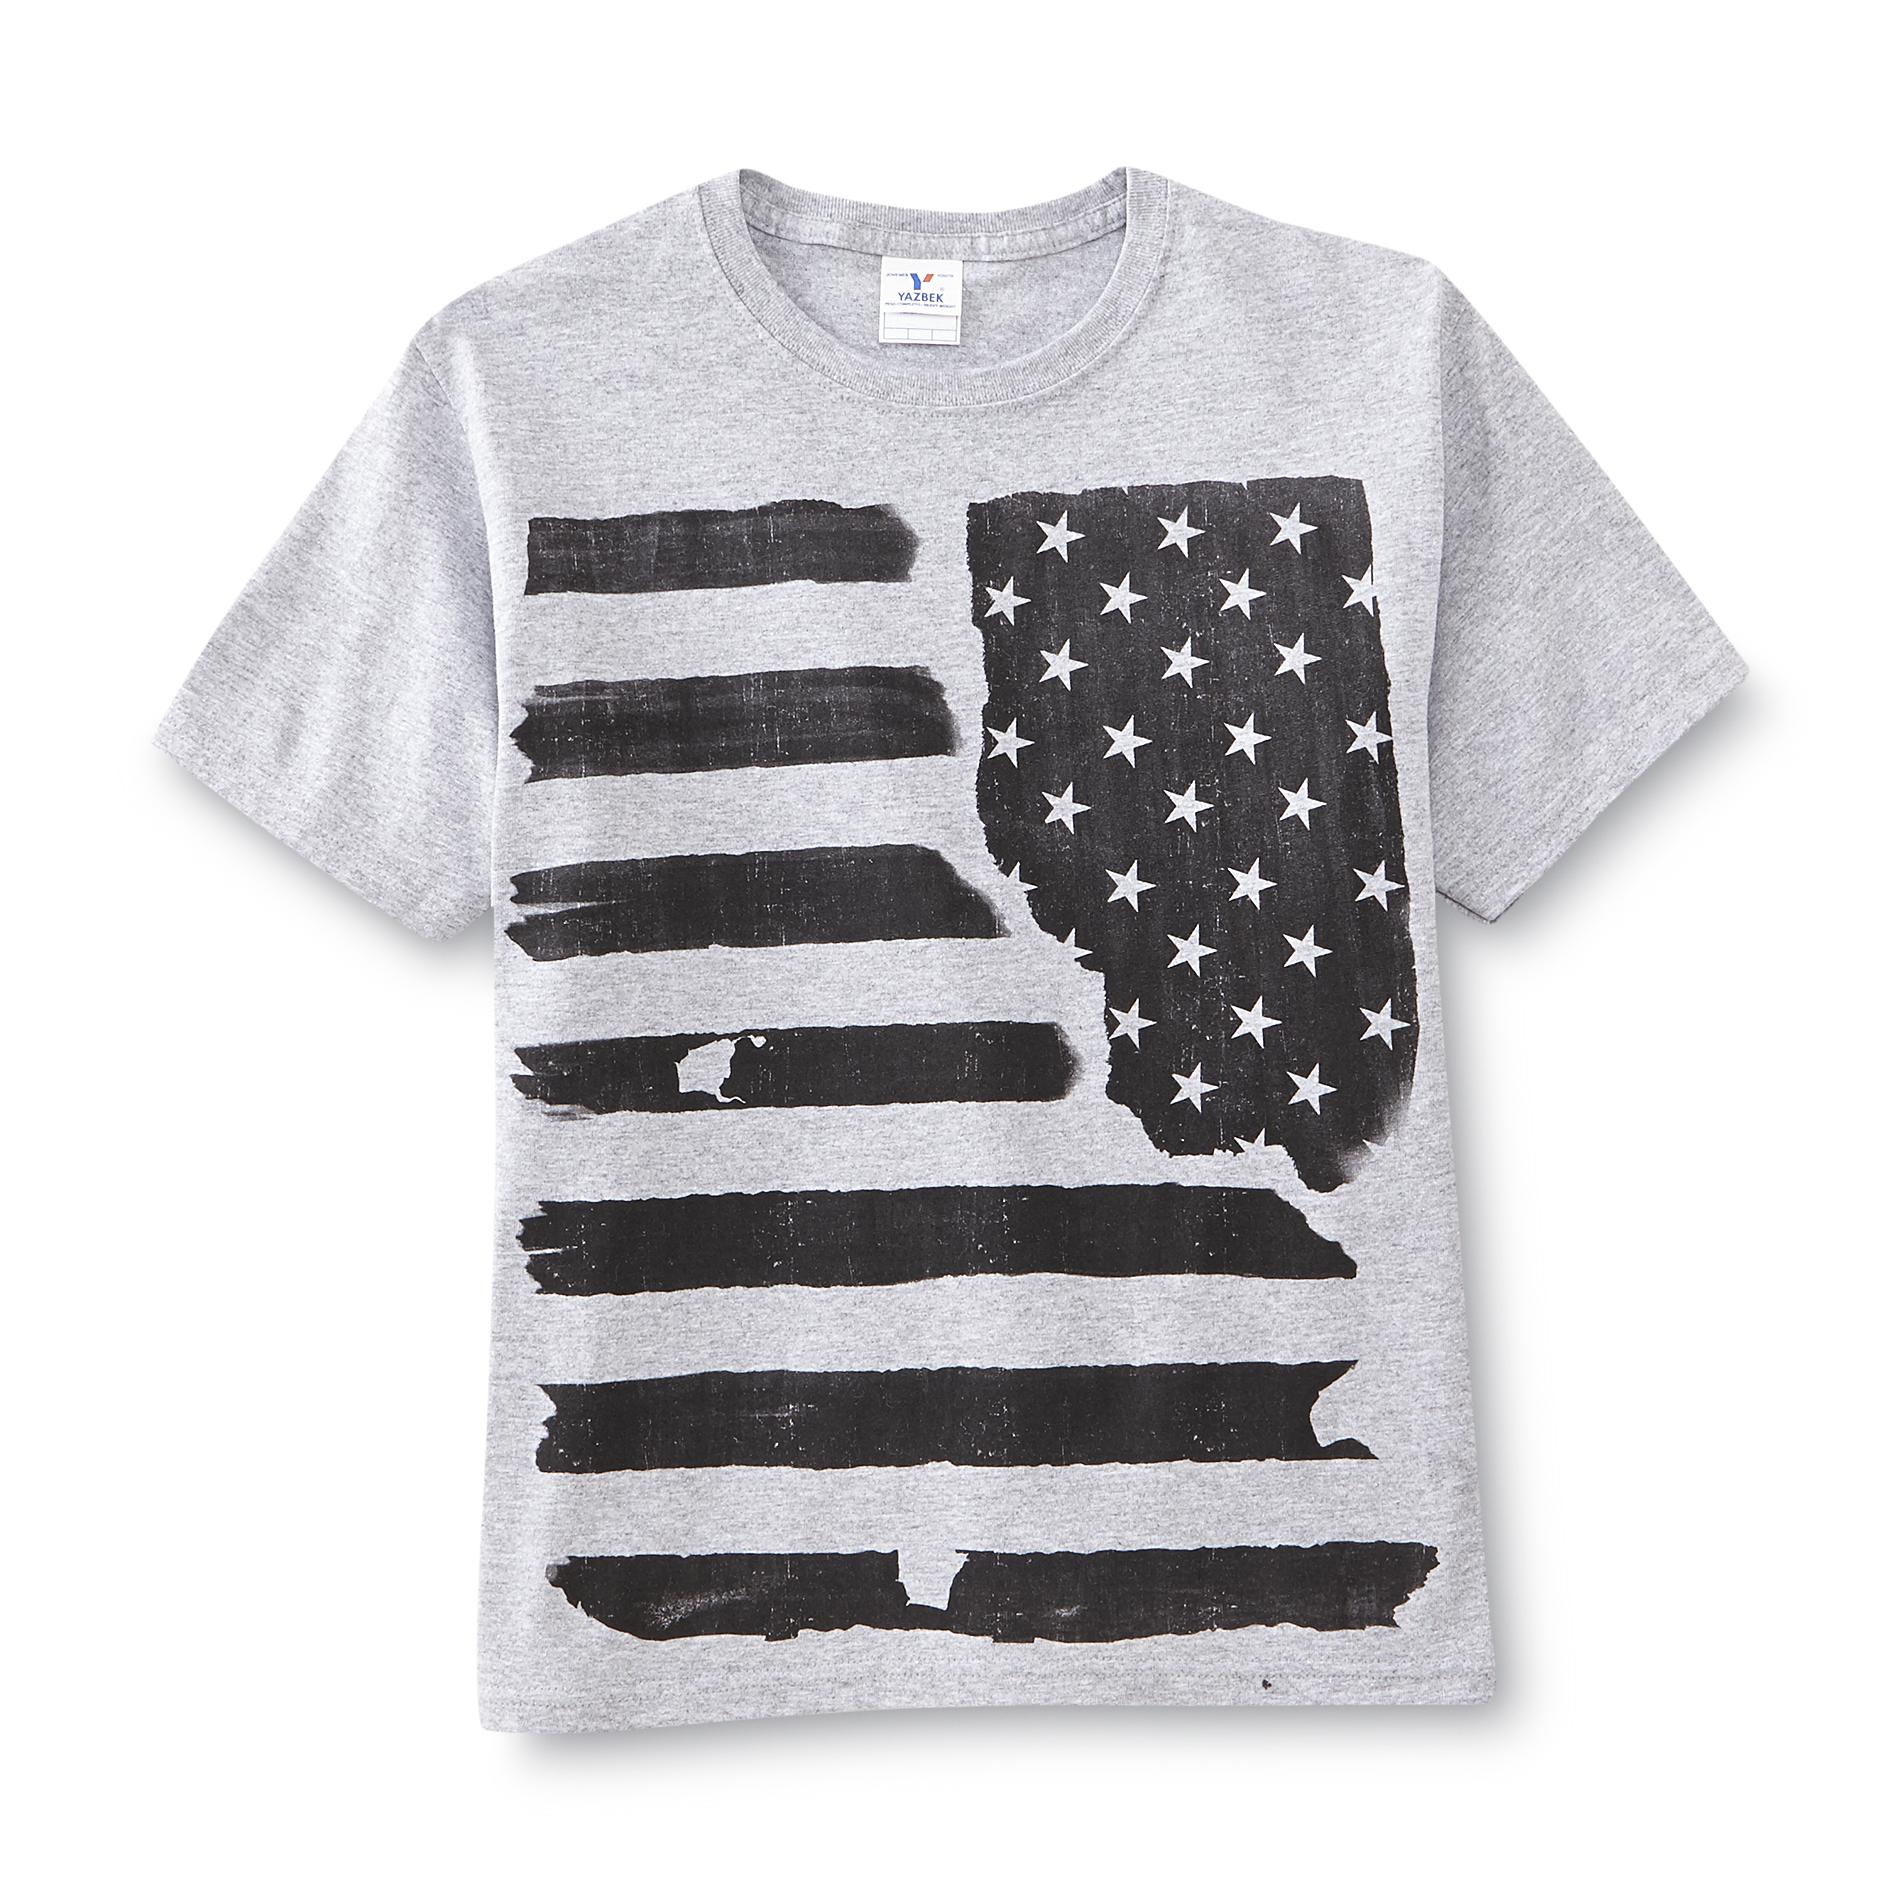 Route 66 Boy's Graphic T-Shirt - American Flag